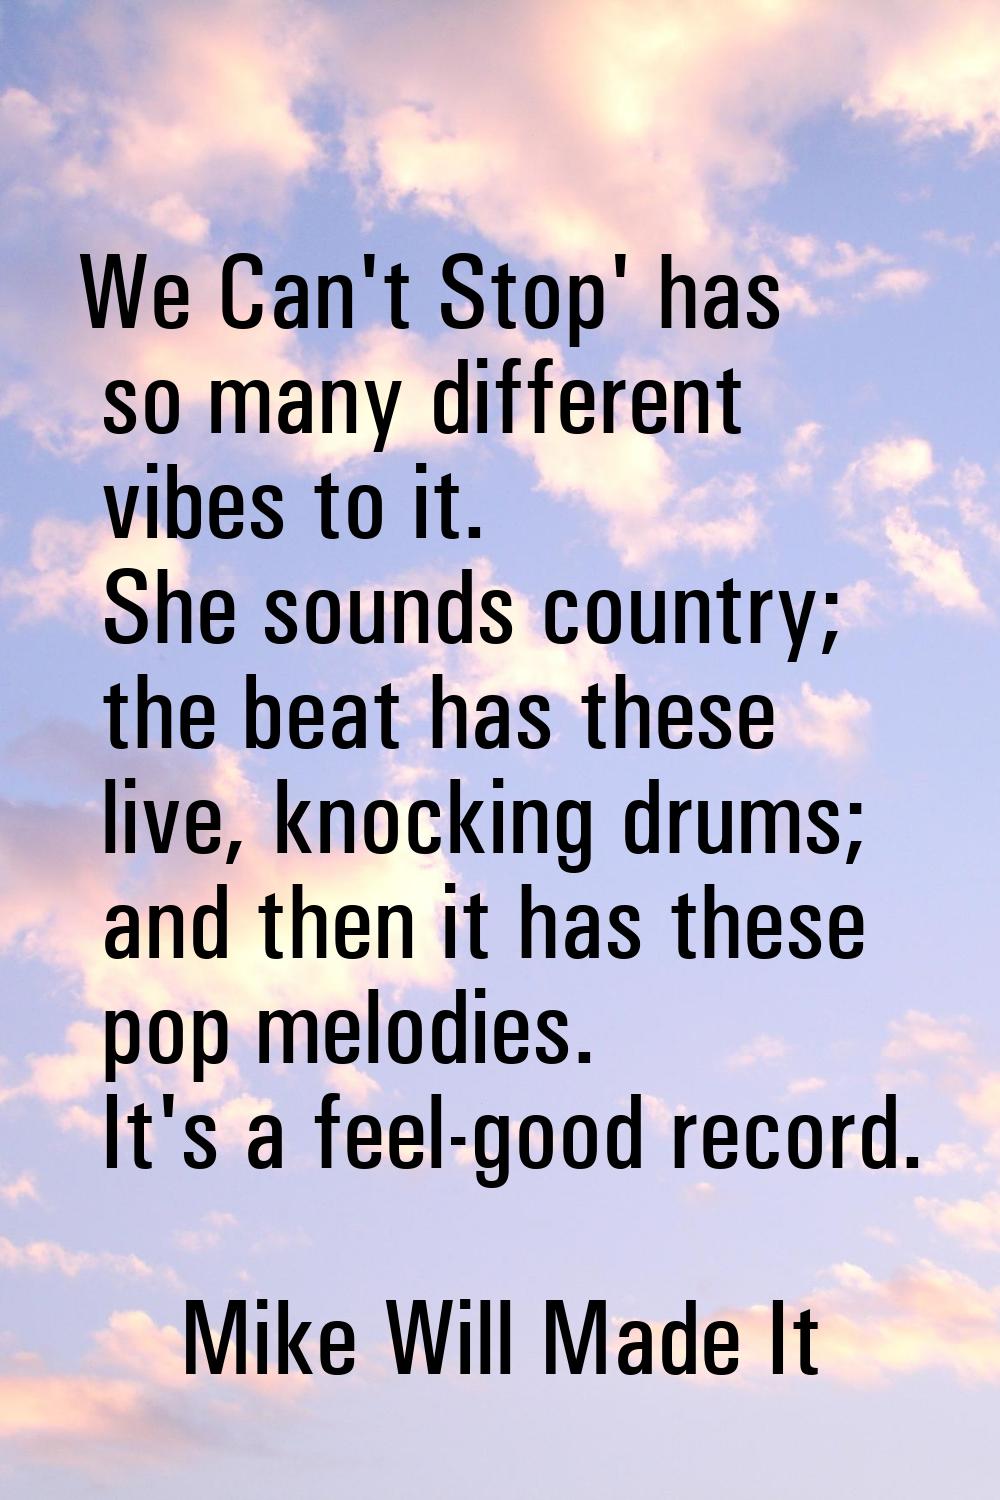 We Can't Stop' has so many different vibes to it. She sounds country; the beat has these live, knoc